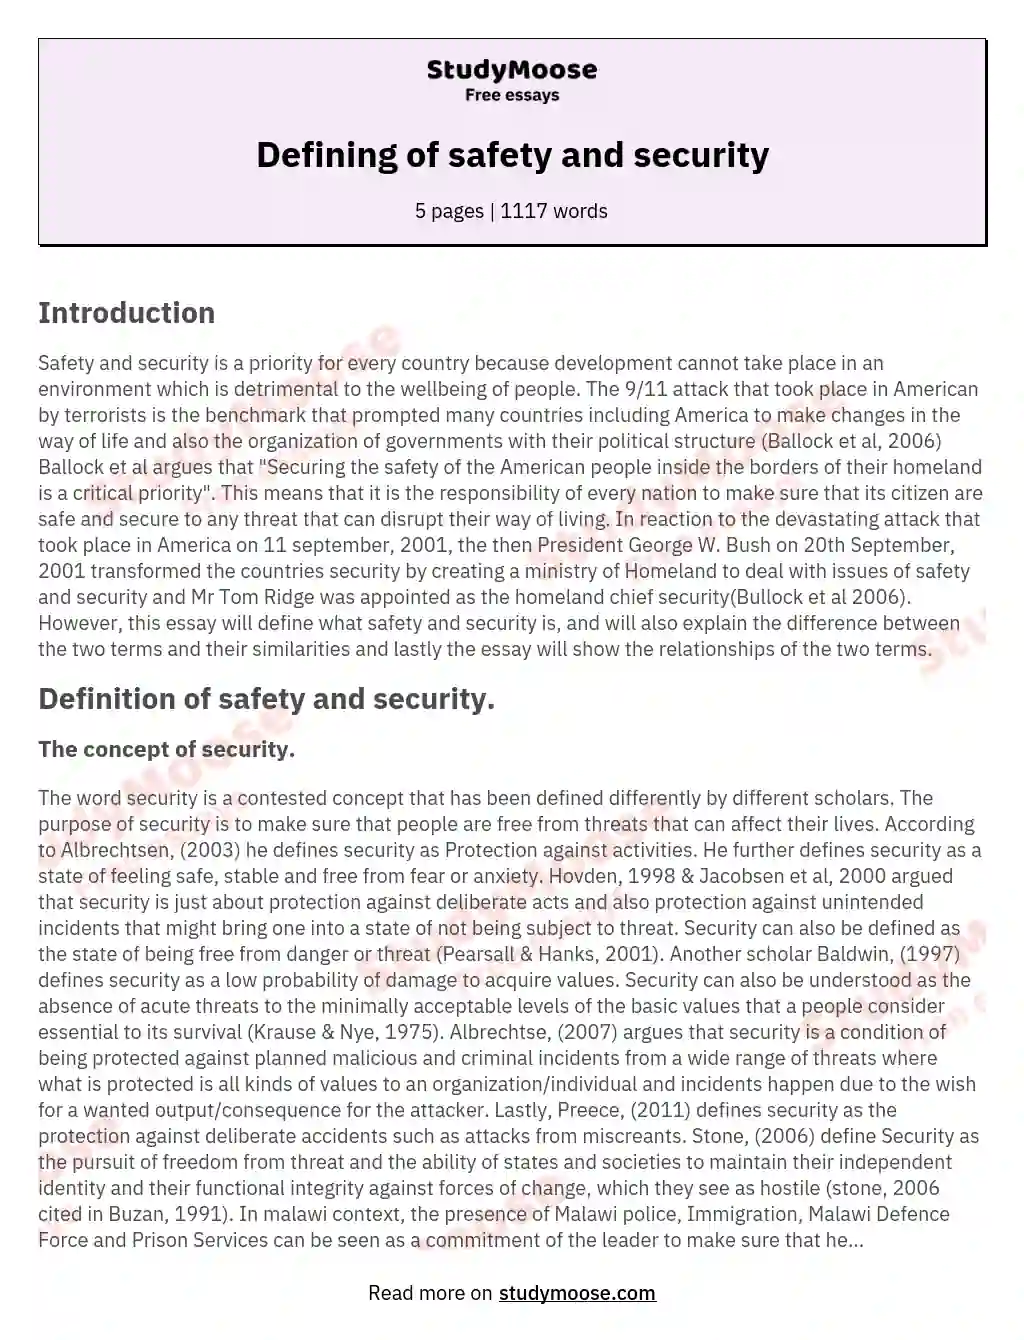 safety security and well being essay